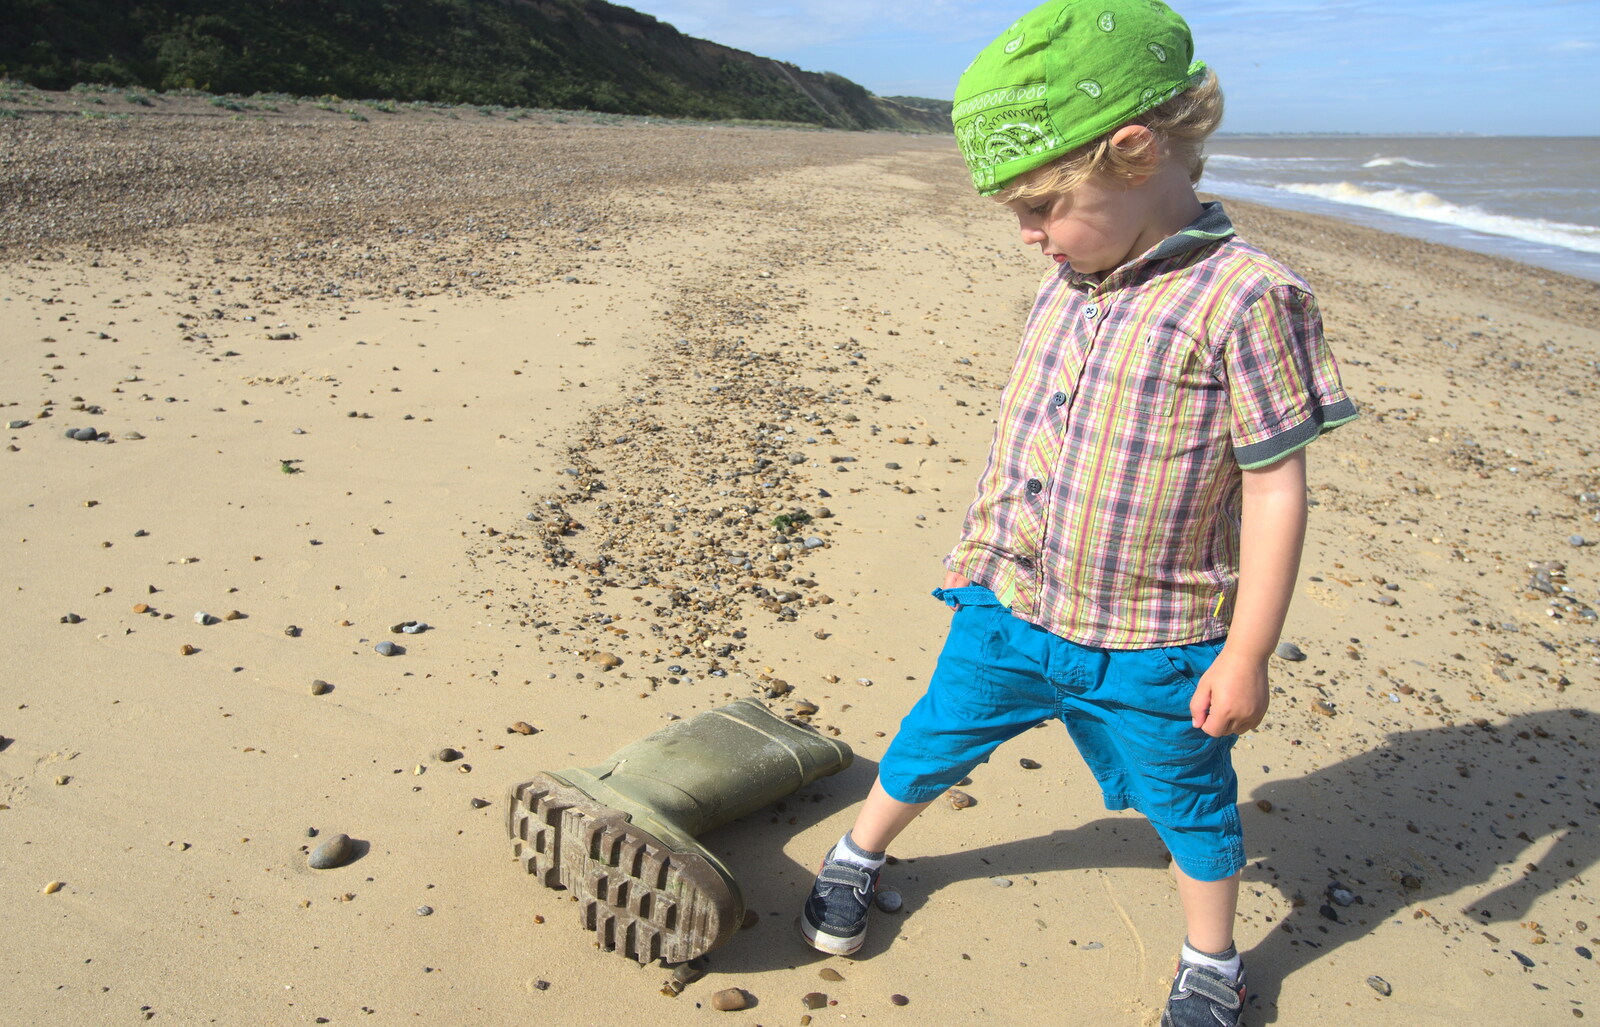 Fred discovers a huge welly boot on the beach from Camping by the Seaside, Cliff House, Dunwich, Suffolk - 15th August 2012